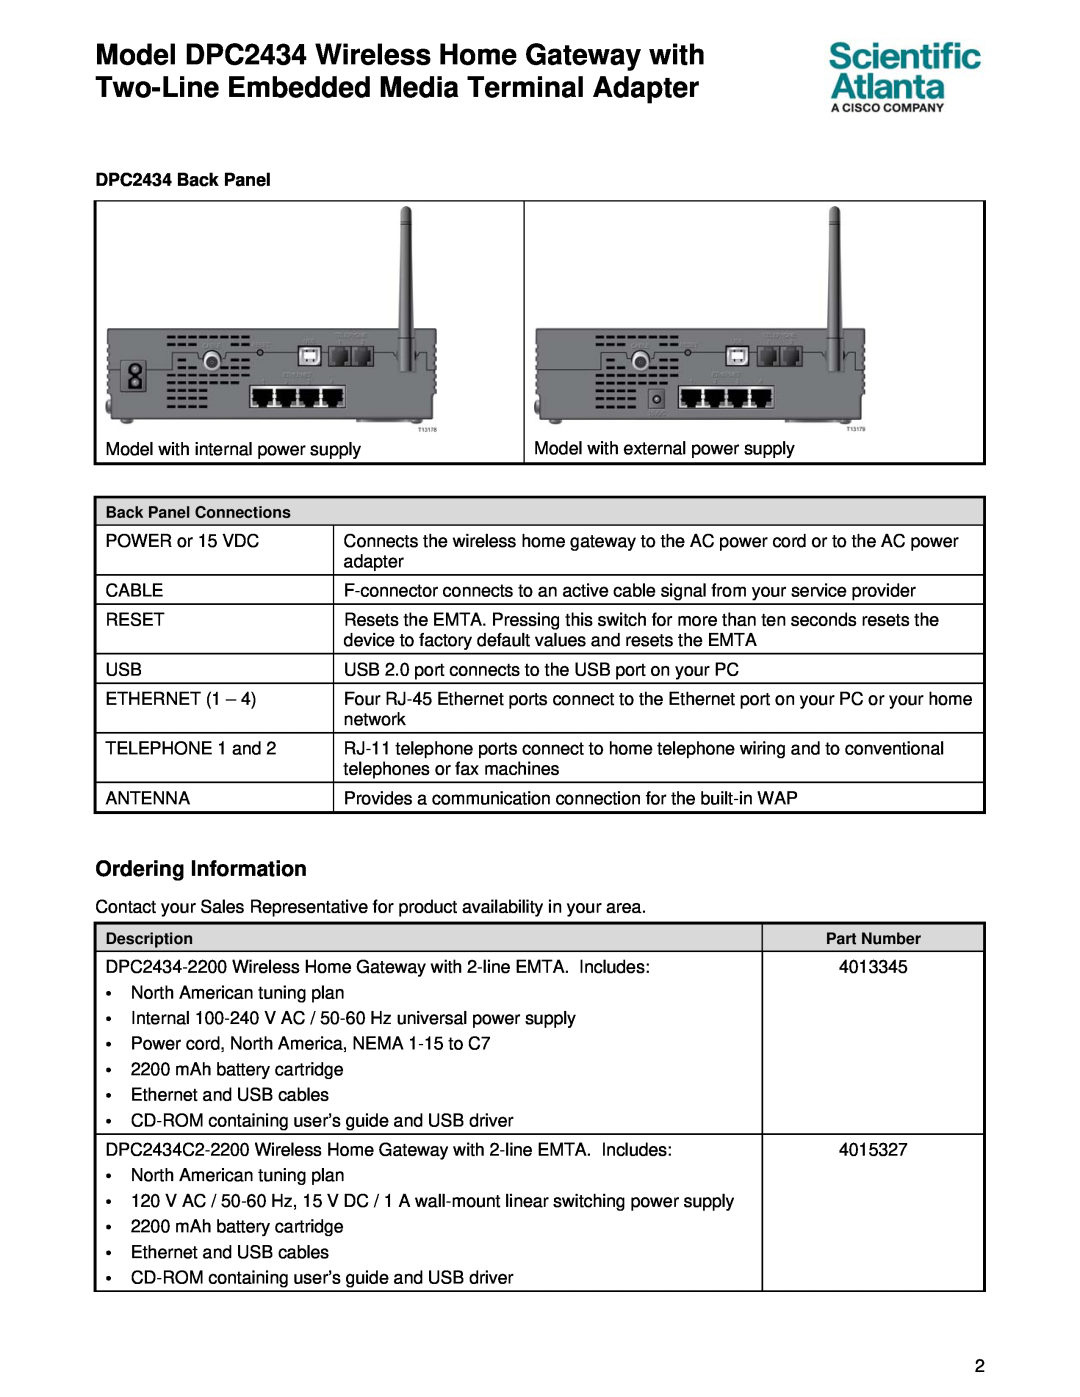 Cisco Systems specifications Ordering Information, DPC2434 Back Panel 